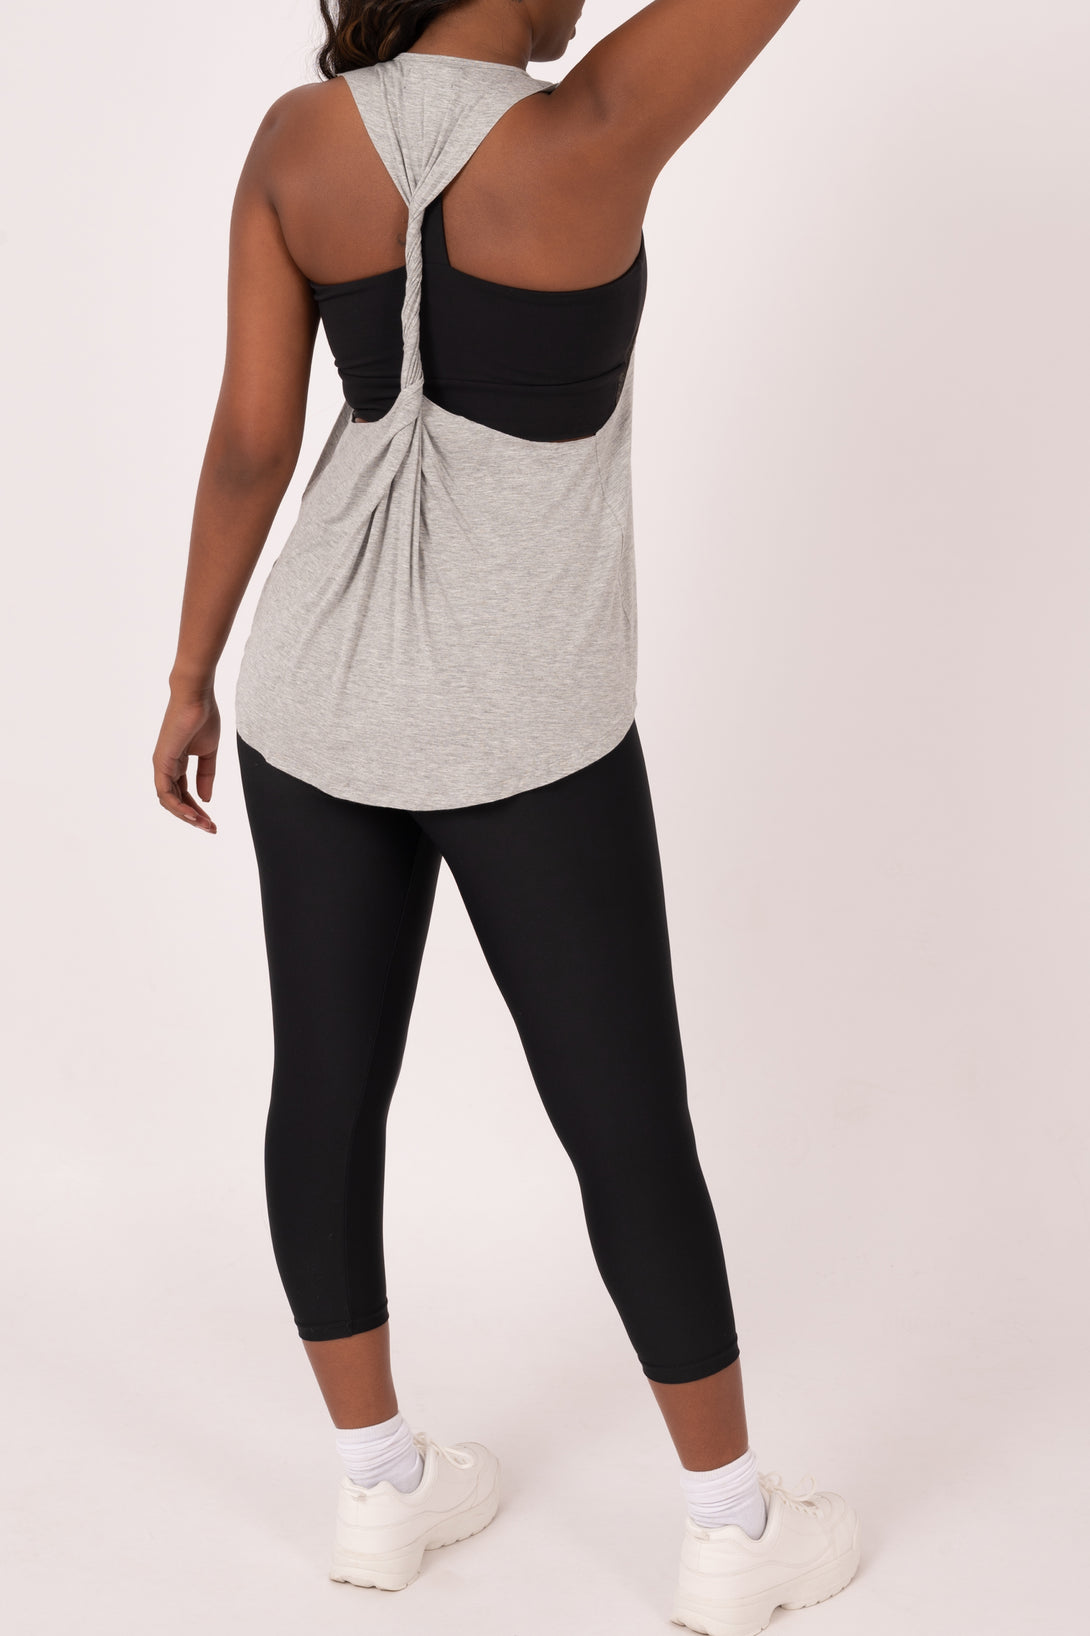 Heather Grey Slinky To Touch - Twisted Racer Back Tank - Exoticathletica